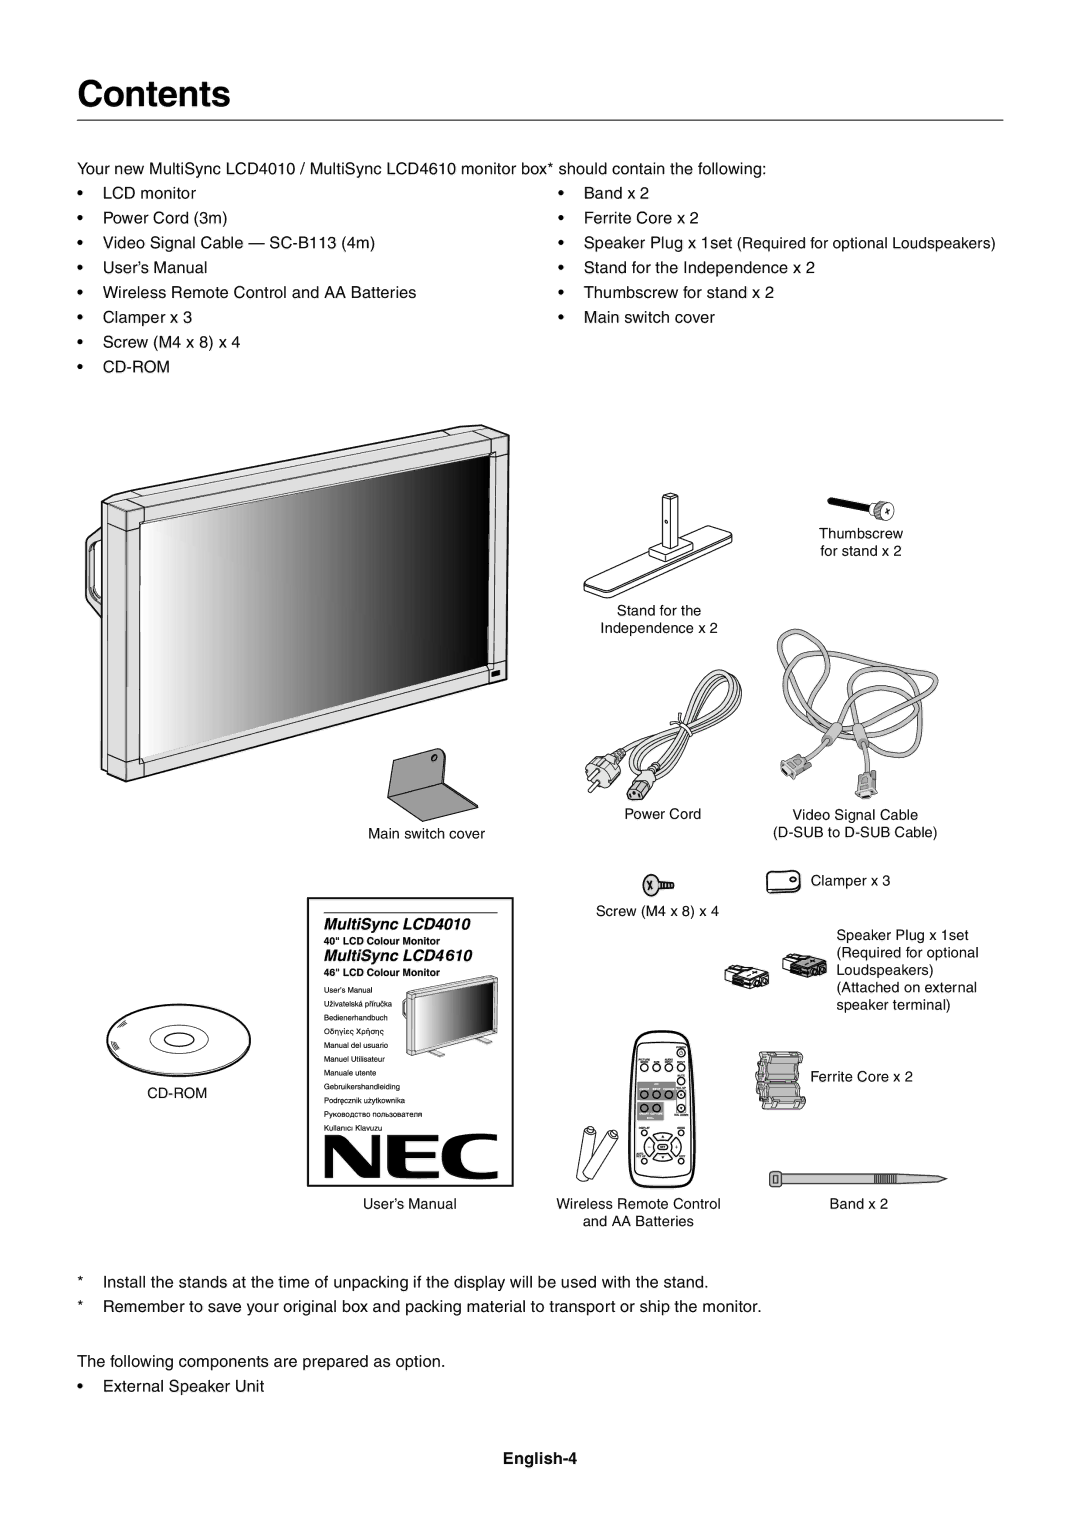 NEC LCD4610, LCD4610, LCD4010, LCD4610 user manual Contents 